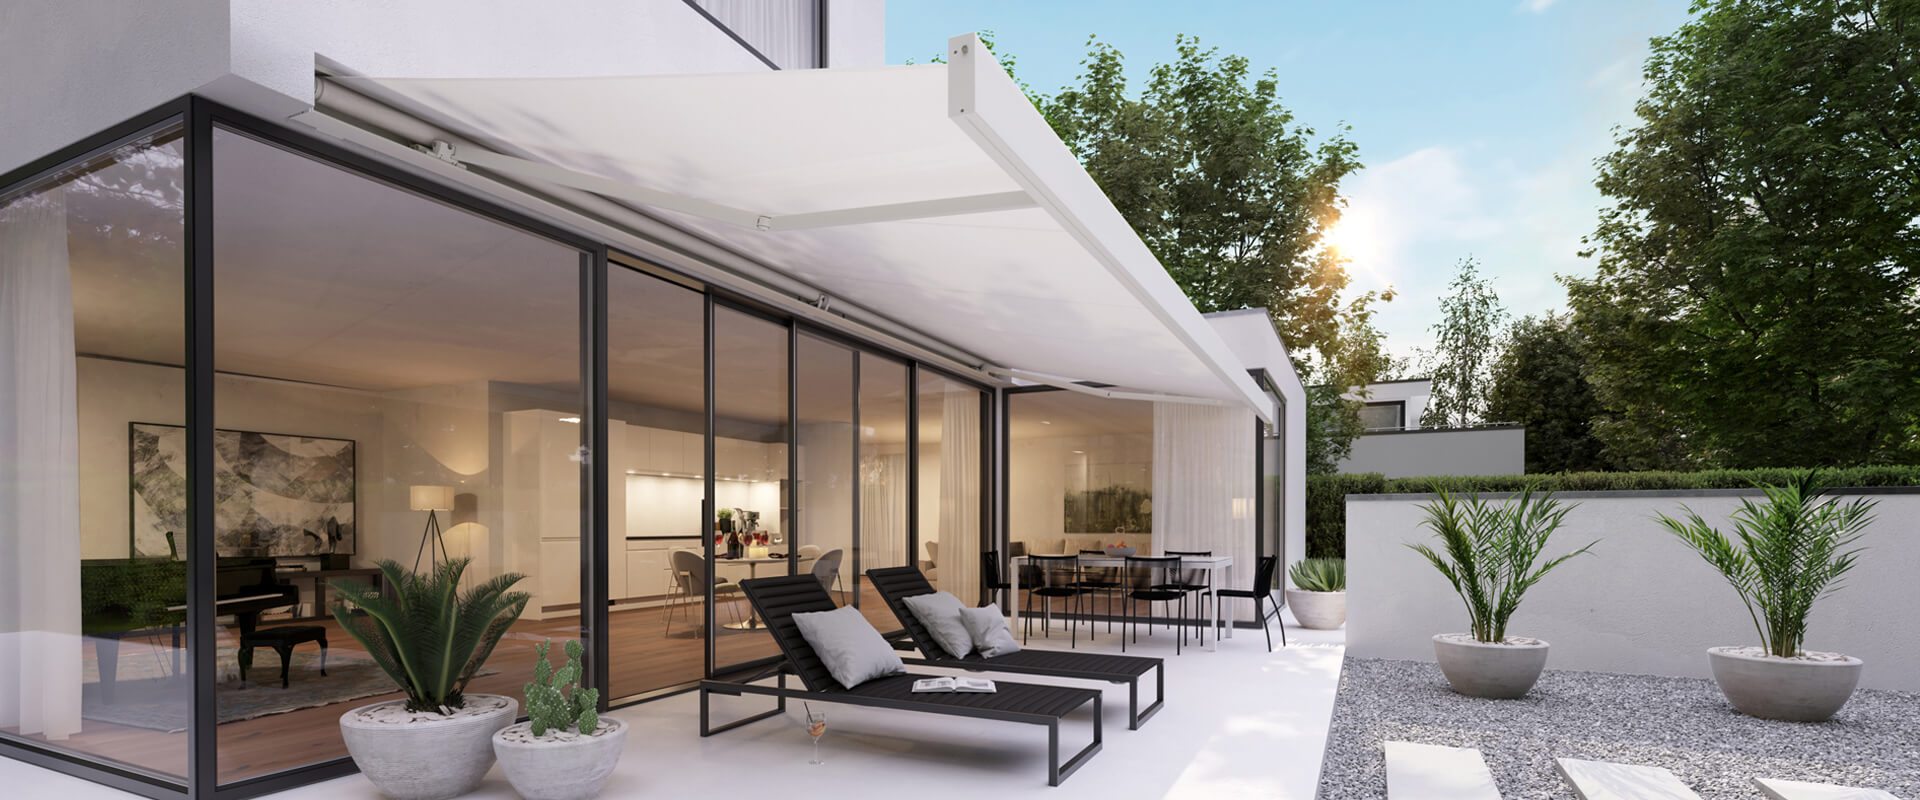 Markilux Brisbane by Dove Industry - Image features folding arm awning